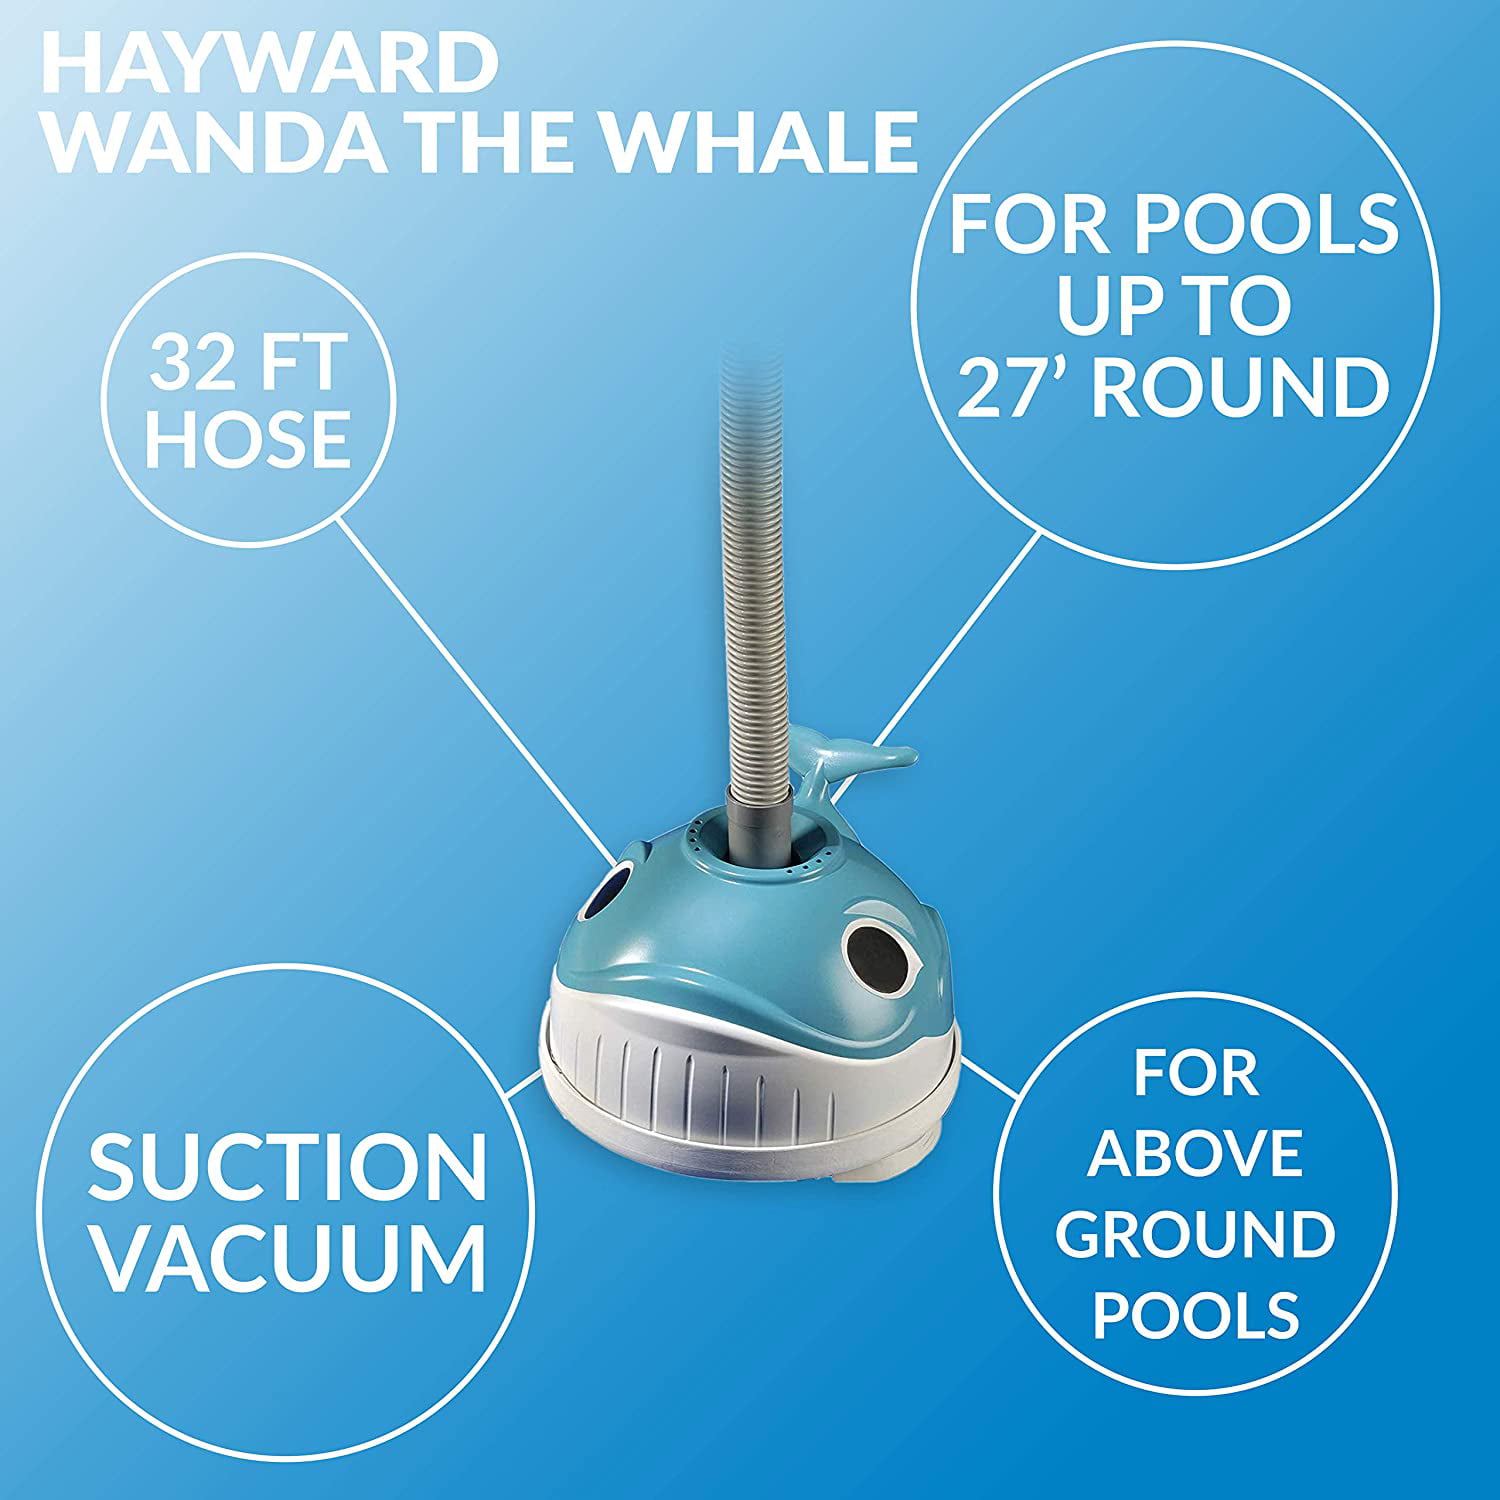 900 Hayward Wanda the Whale Above Ground Automatic Pool Cleaner 